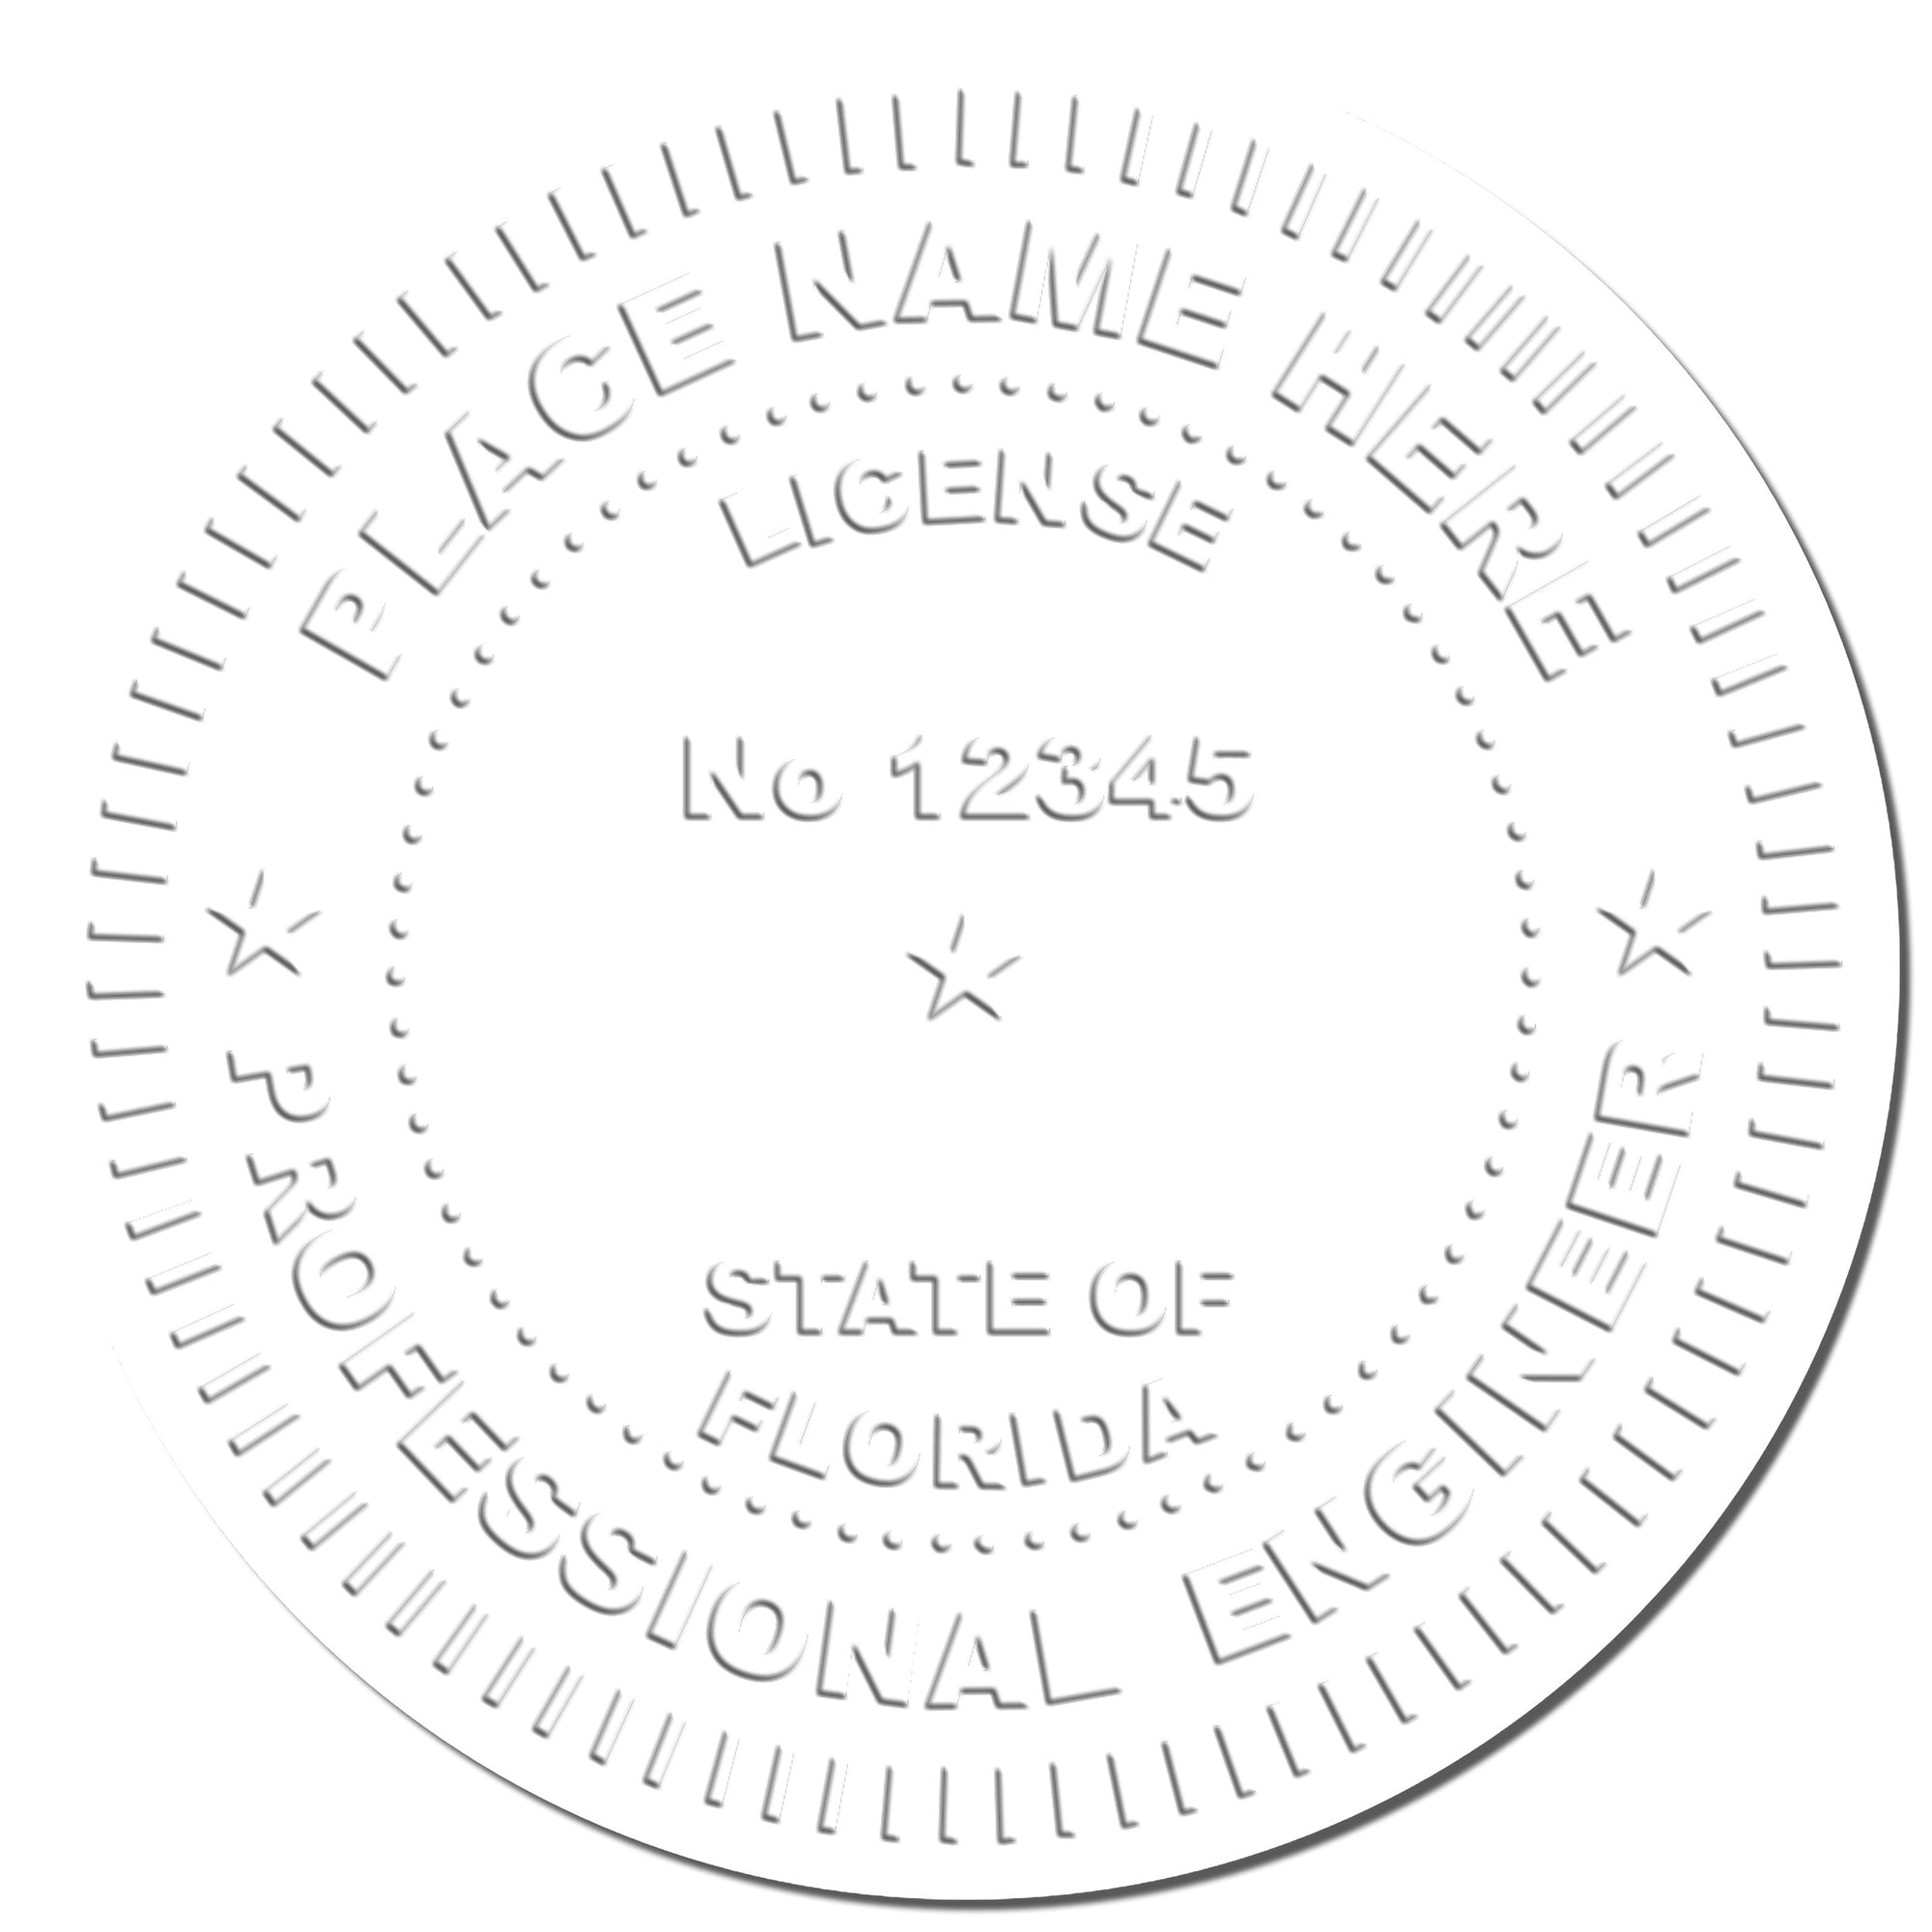 The main image for the Florida Engineer Desk Seal depicting a sample of the imprint and electronic files